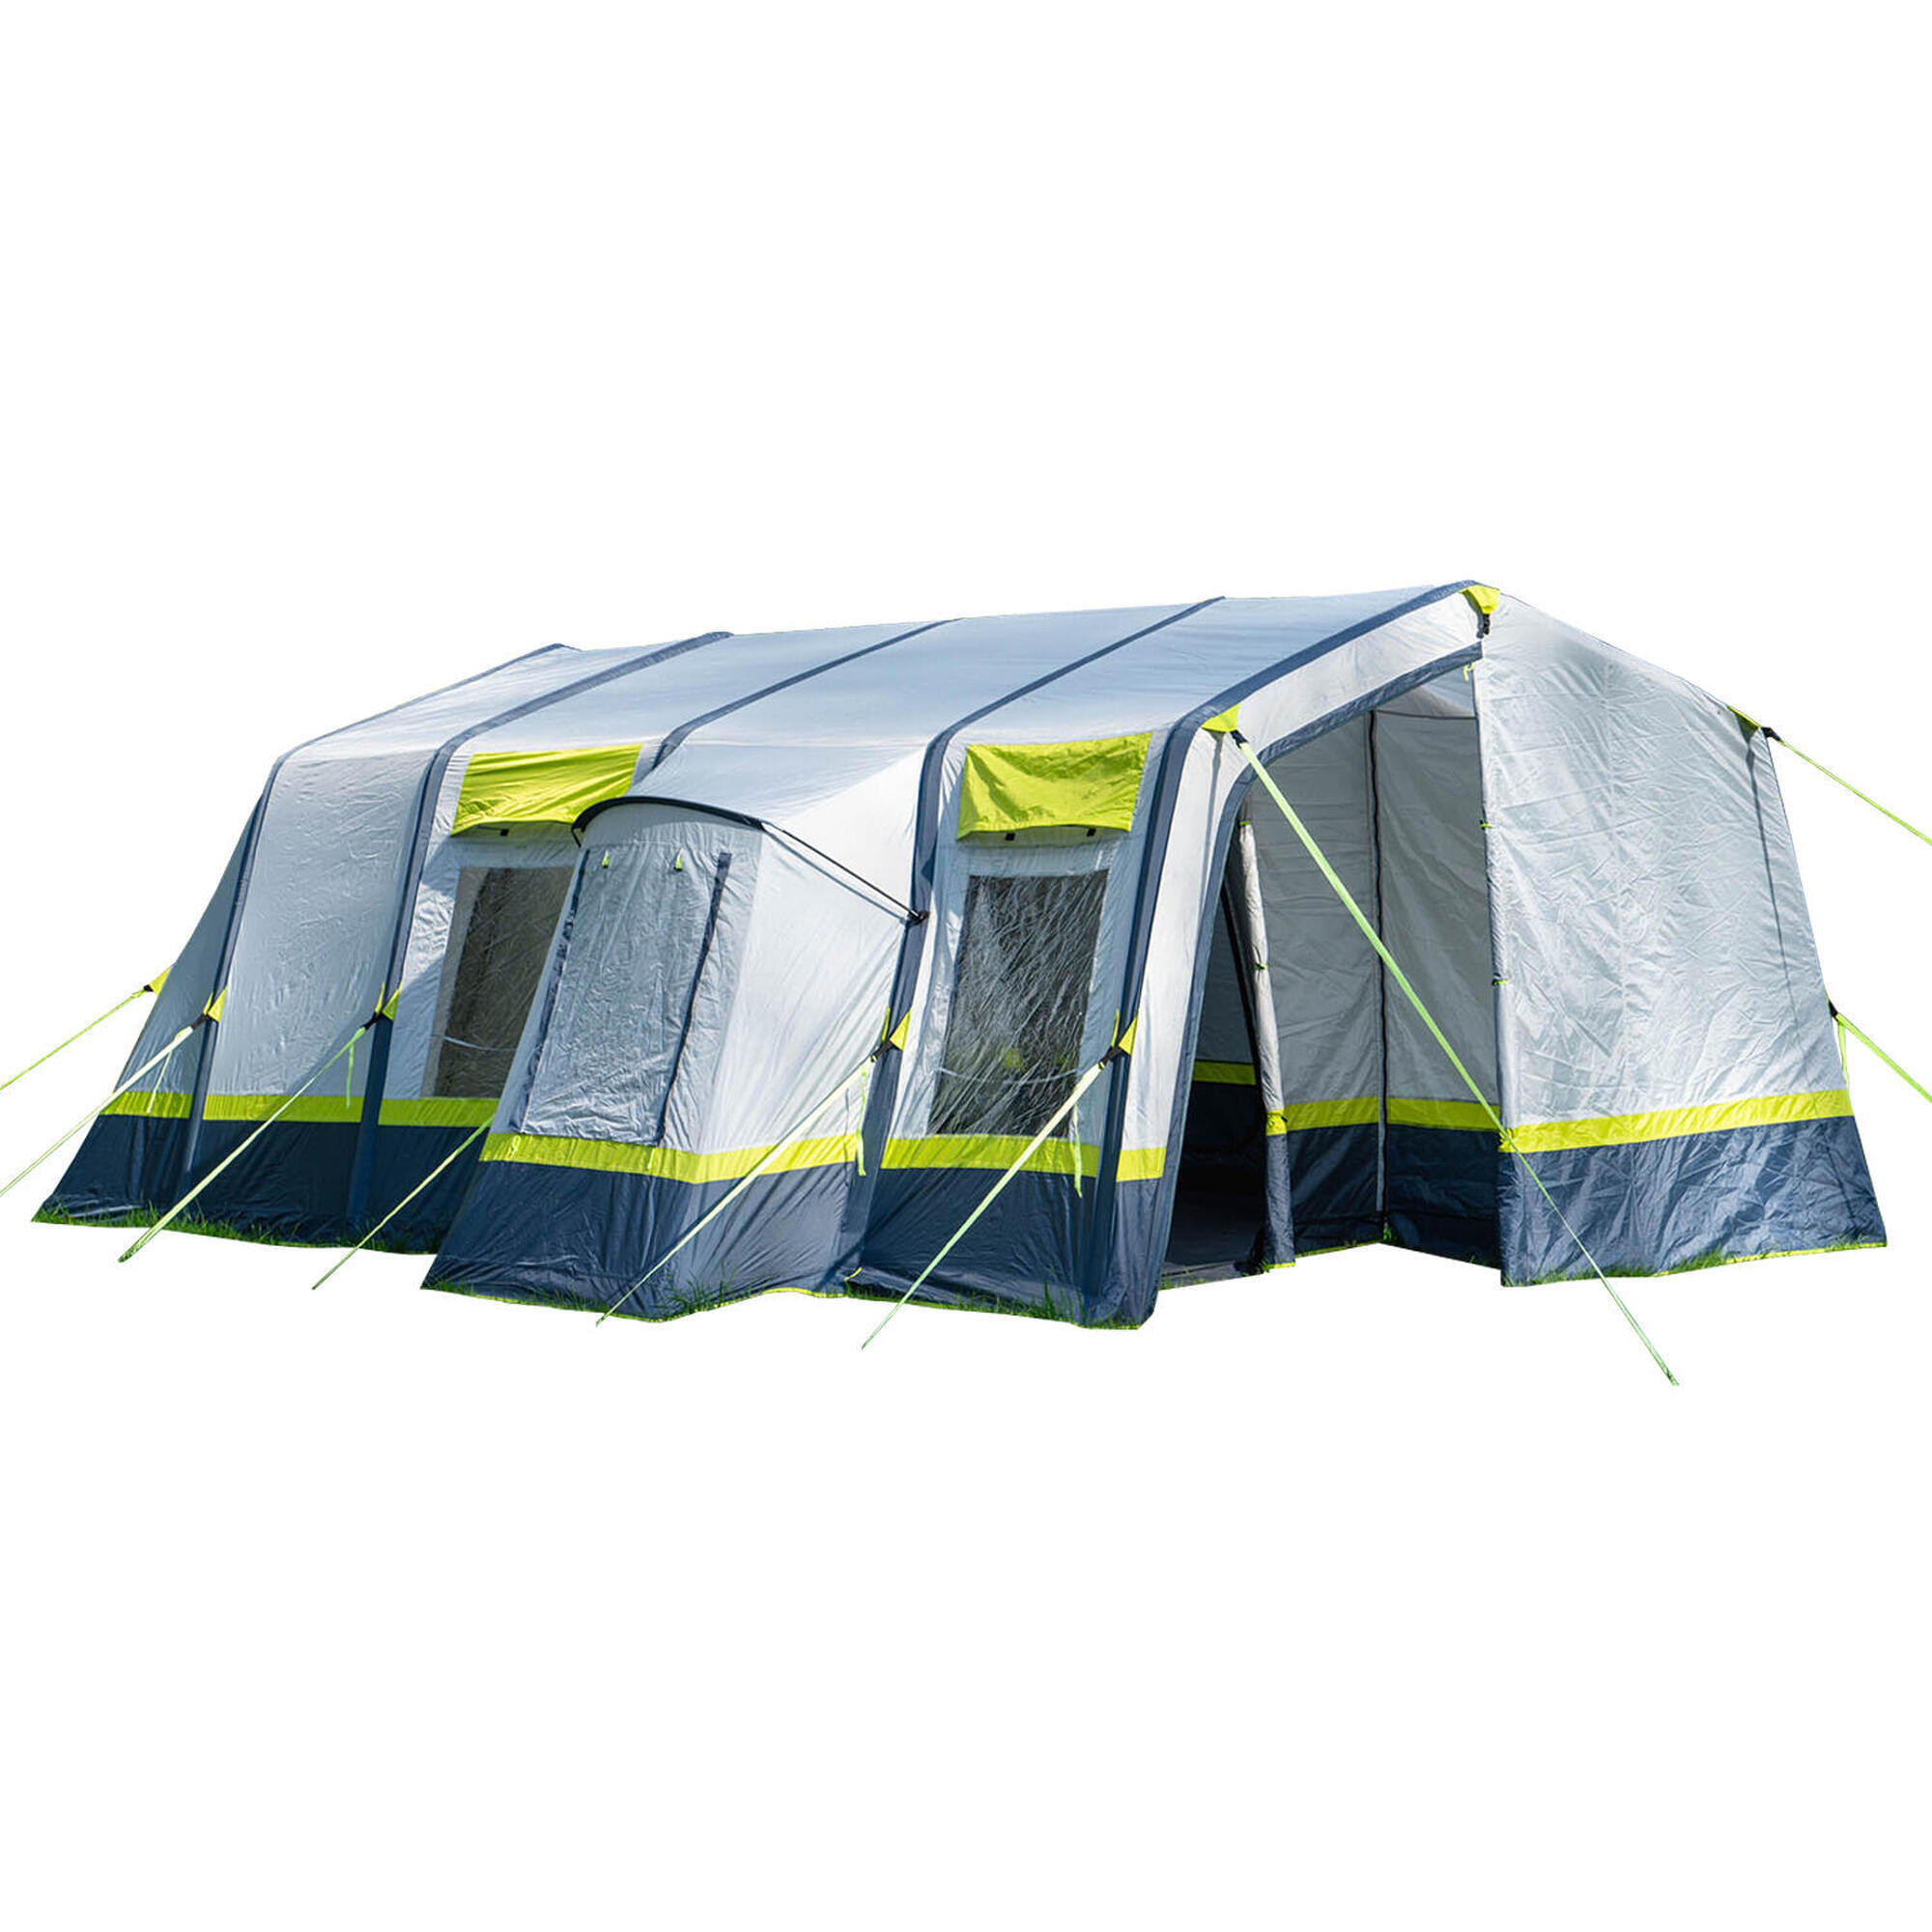 OLPRO OLPRO Home 5 Berth Inflatable Family Tent